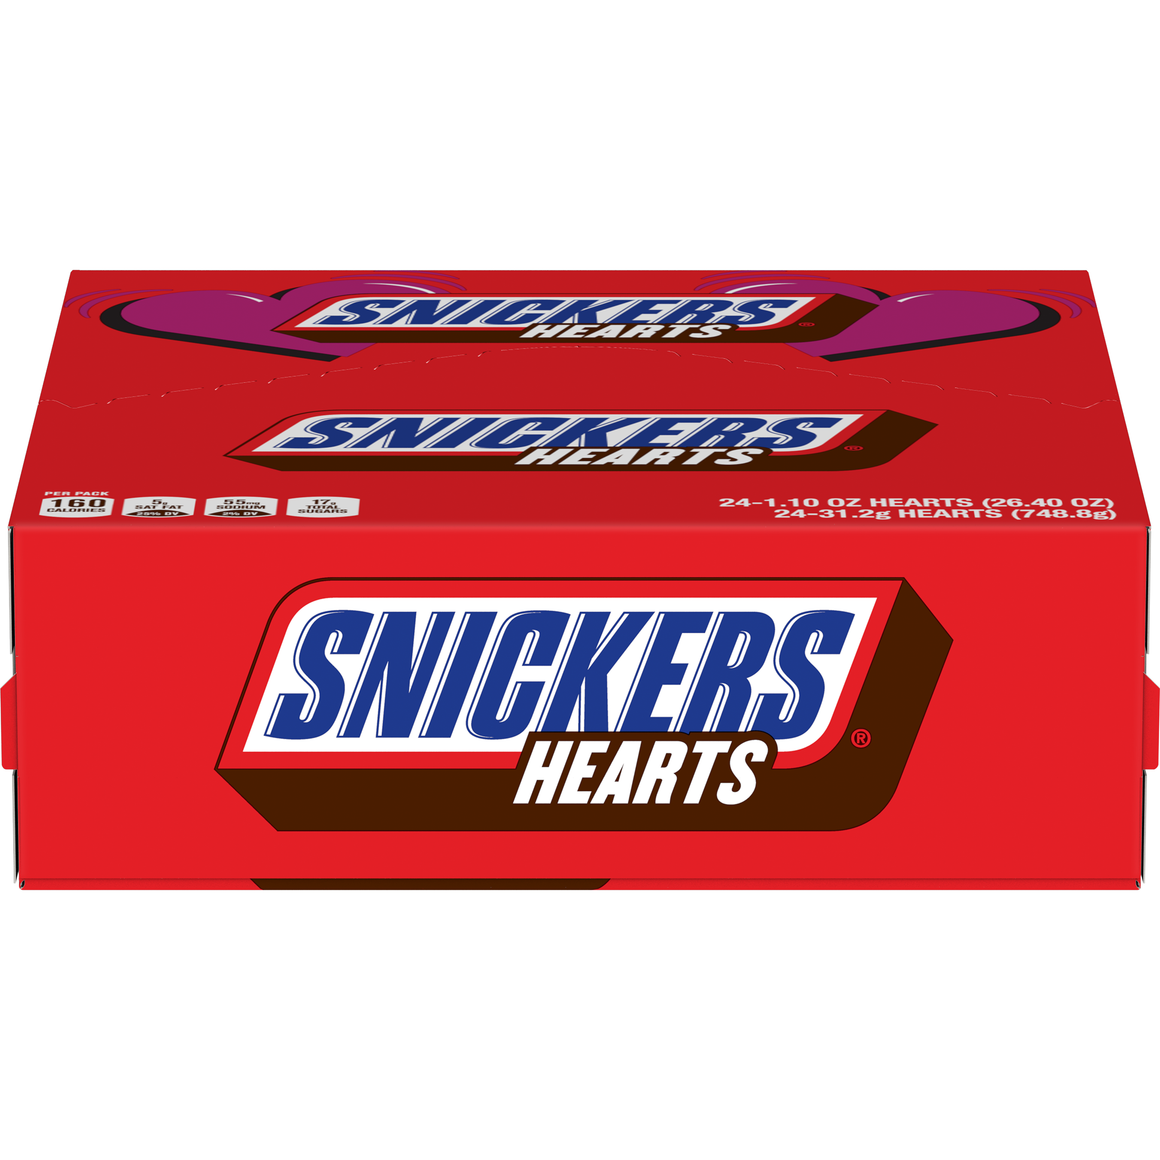 All City Candy Snickers Hearts Chocolate Bar - 1.10 oz 1 Bar Mars Chocolate For fresh candy and great service, visit www.allcitycandy.com